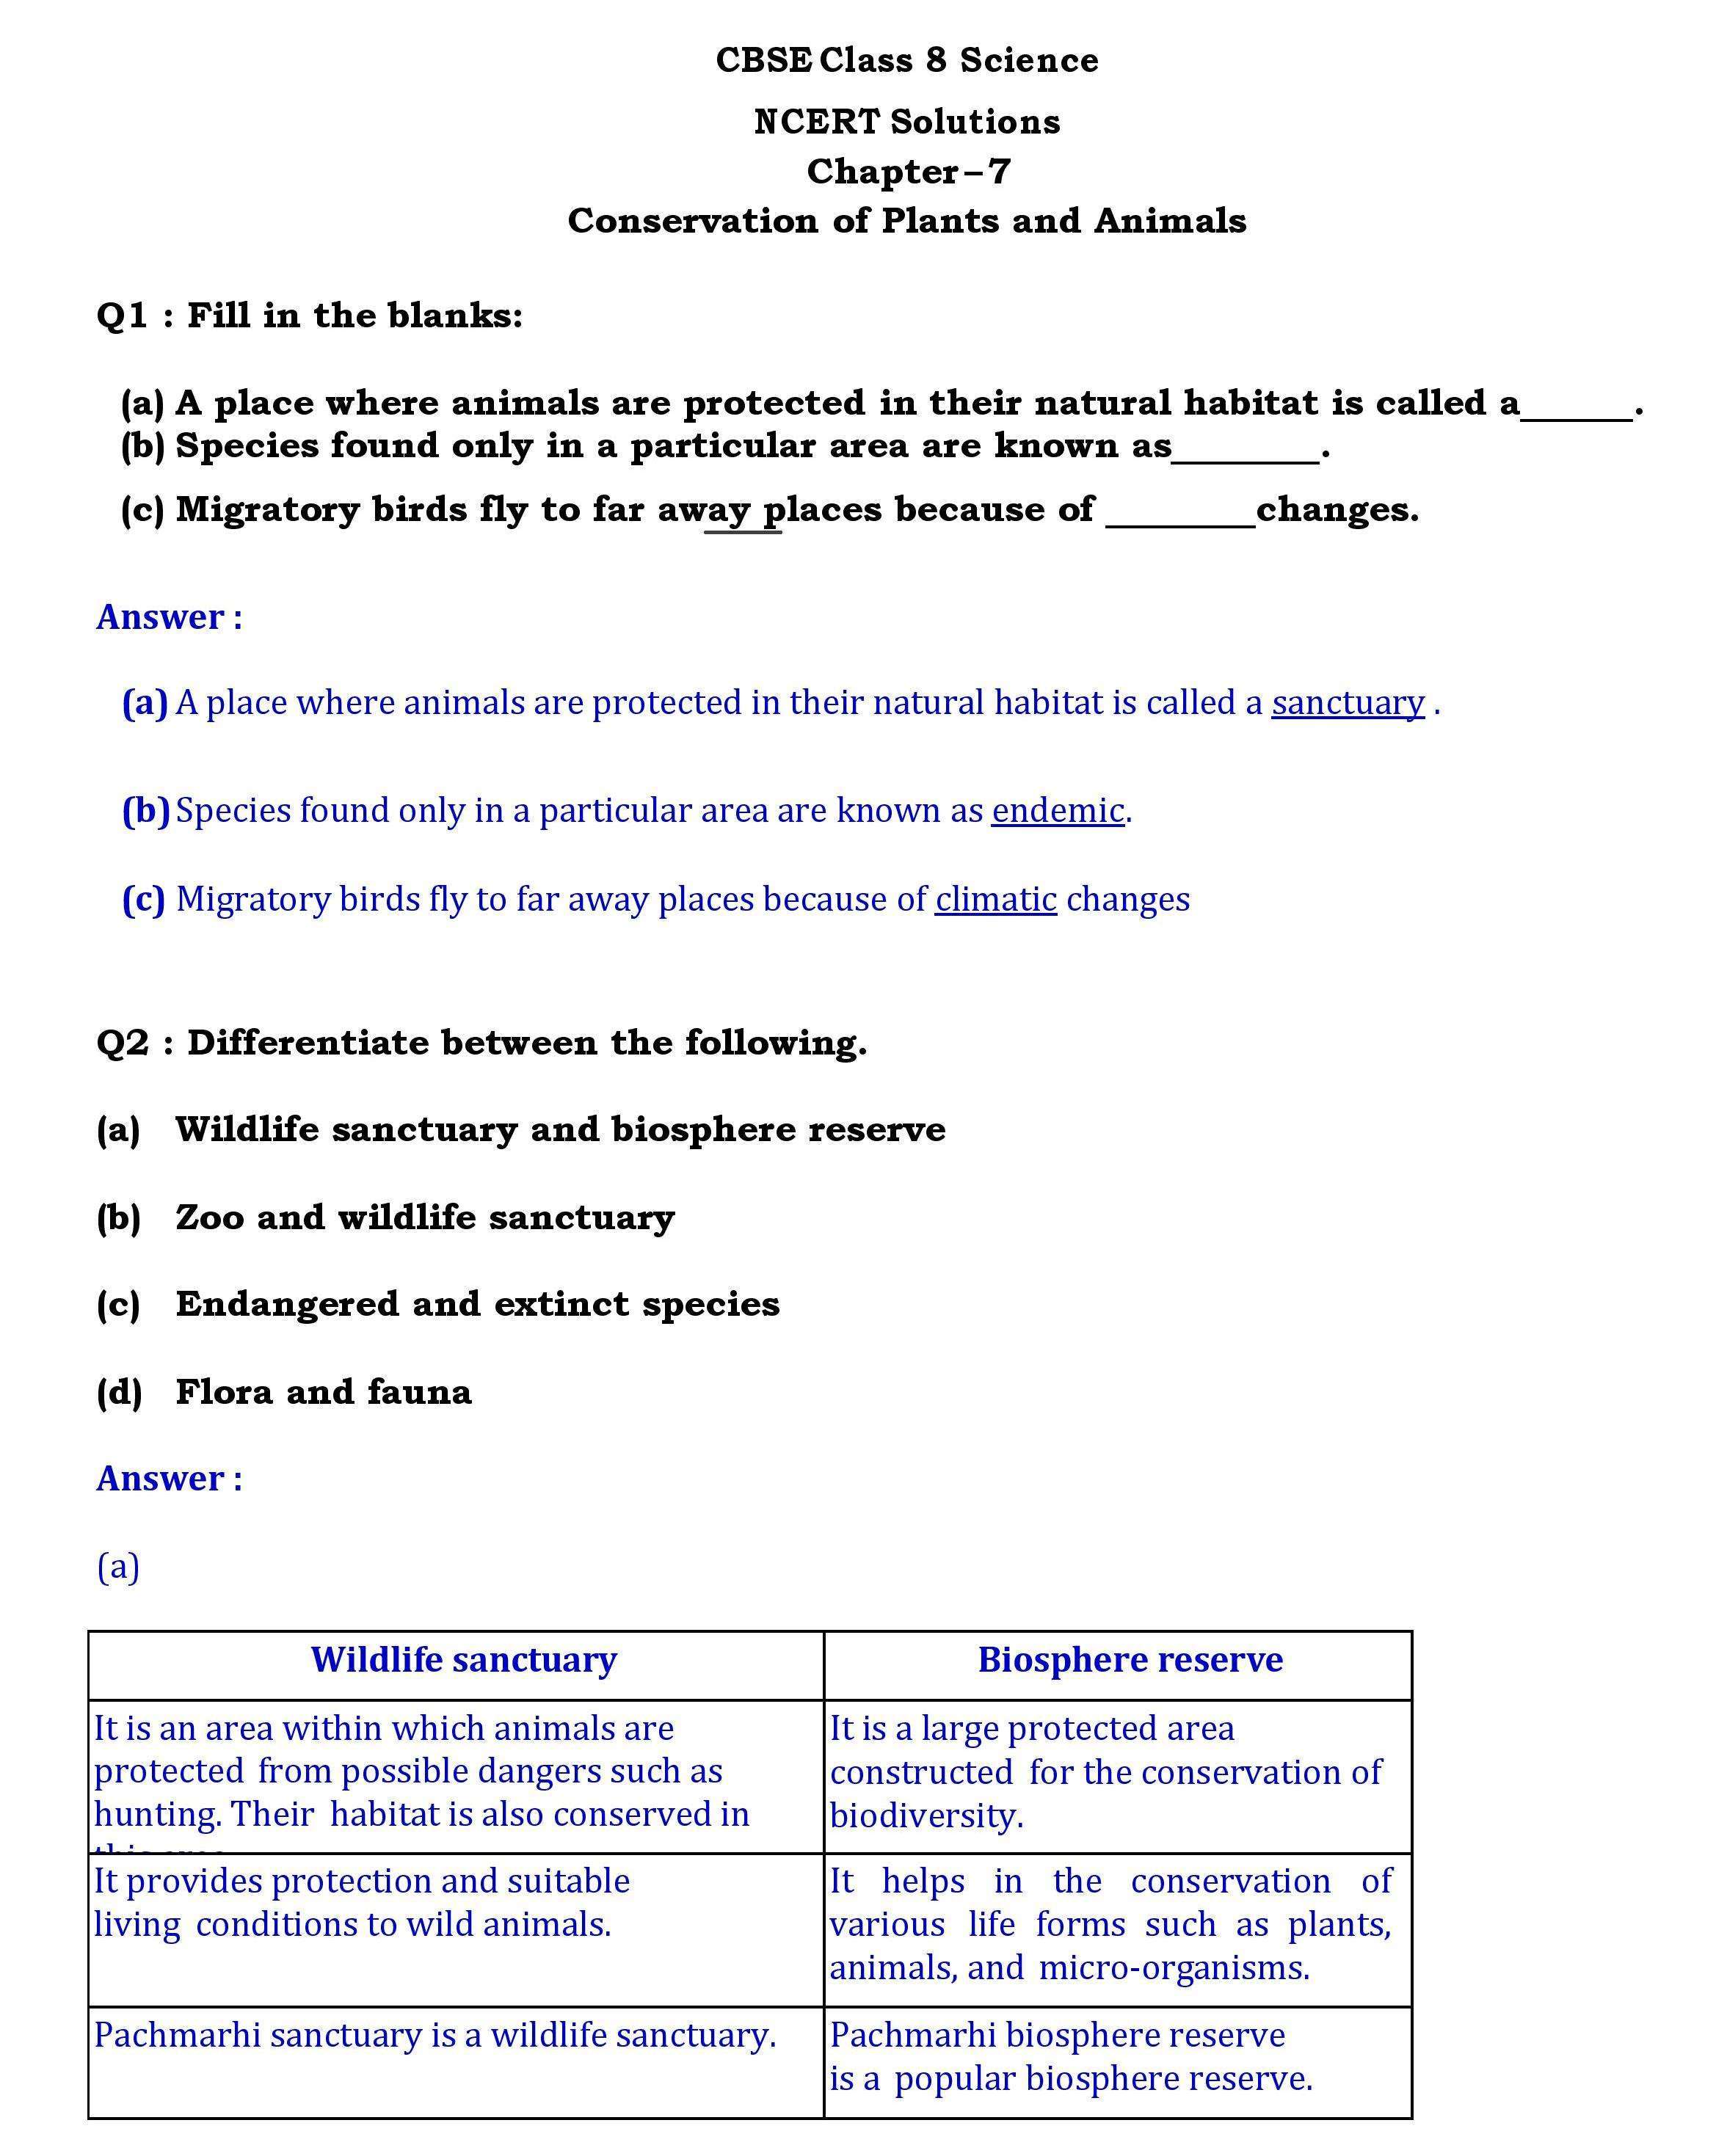 NCERT Solutions for Class 8 Science Chapter 7 page 001